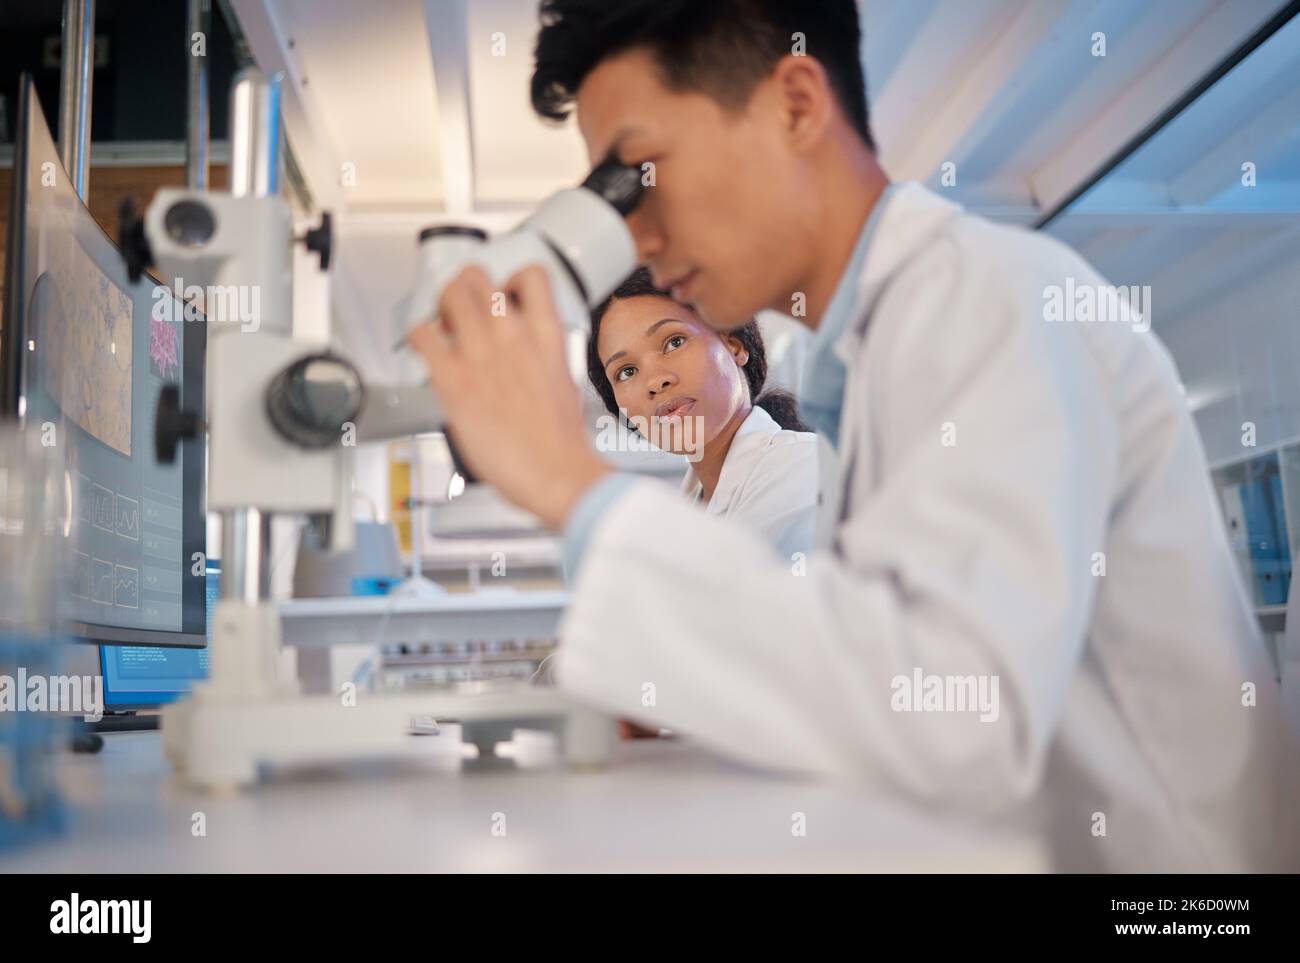 Waiting with baited breath. a young male lab tech analysing samples through a microscope. Stock Photo